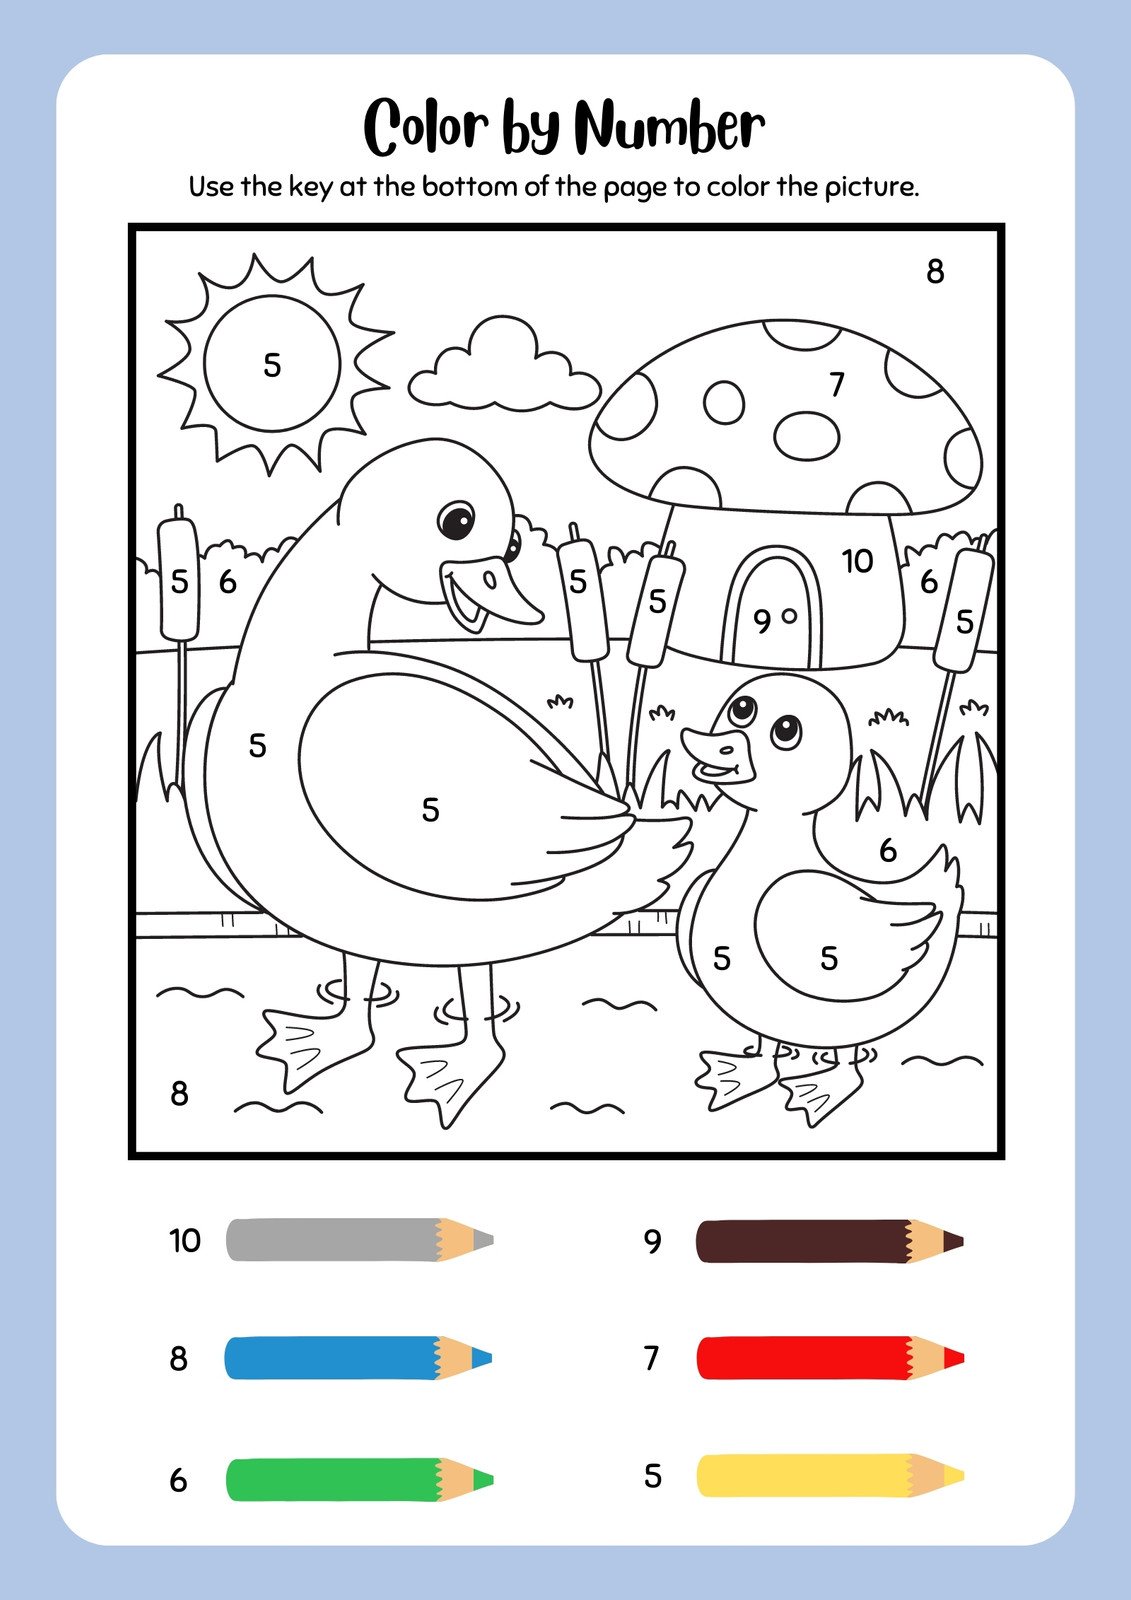 Summer Fun Coloring Activity Book for Kids Ages 4-8: Preschool Kindergarten  Summer Book of Mazes, Dot to Dot, Doodle Pages, Color by Number, Word